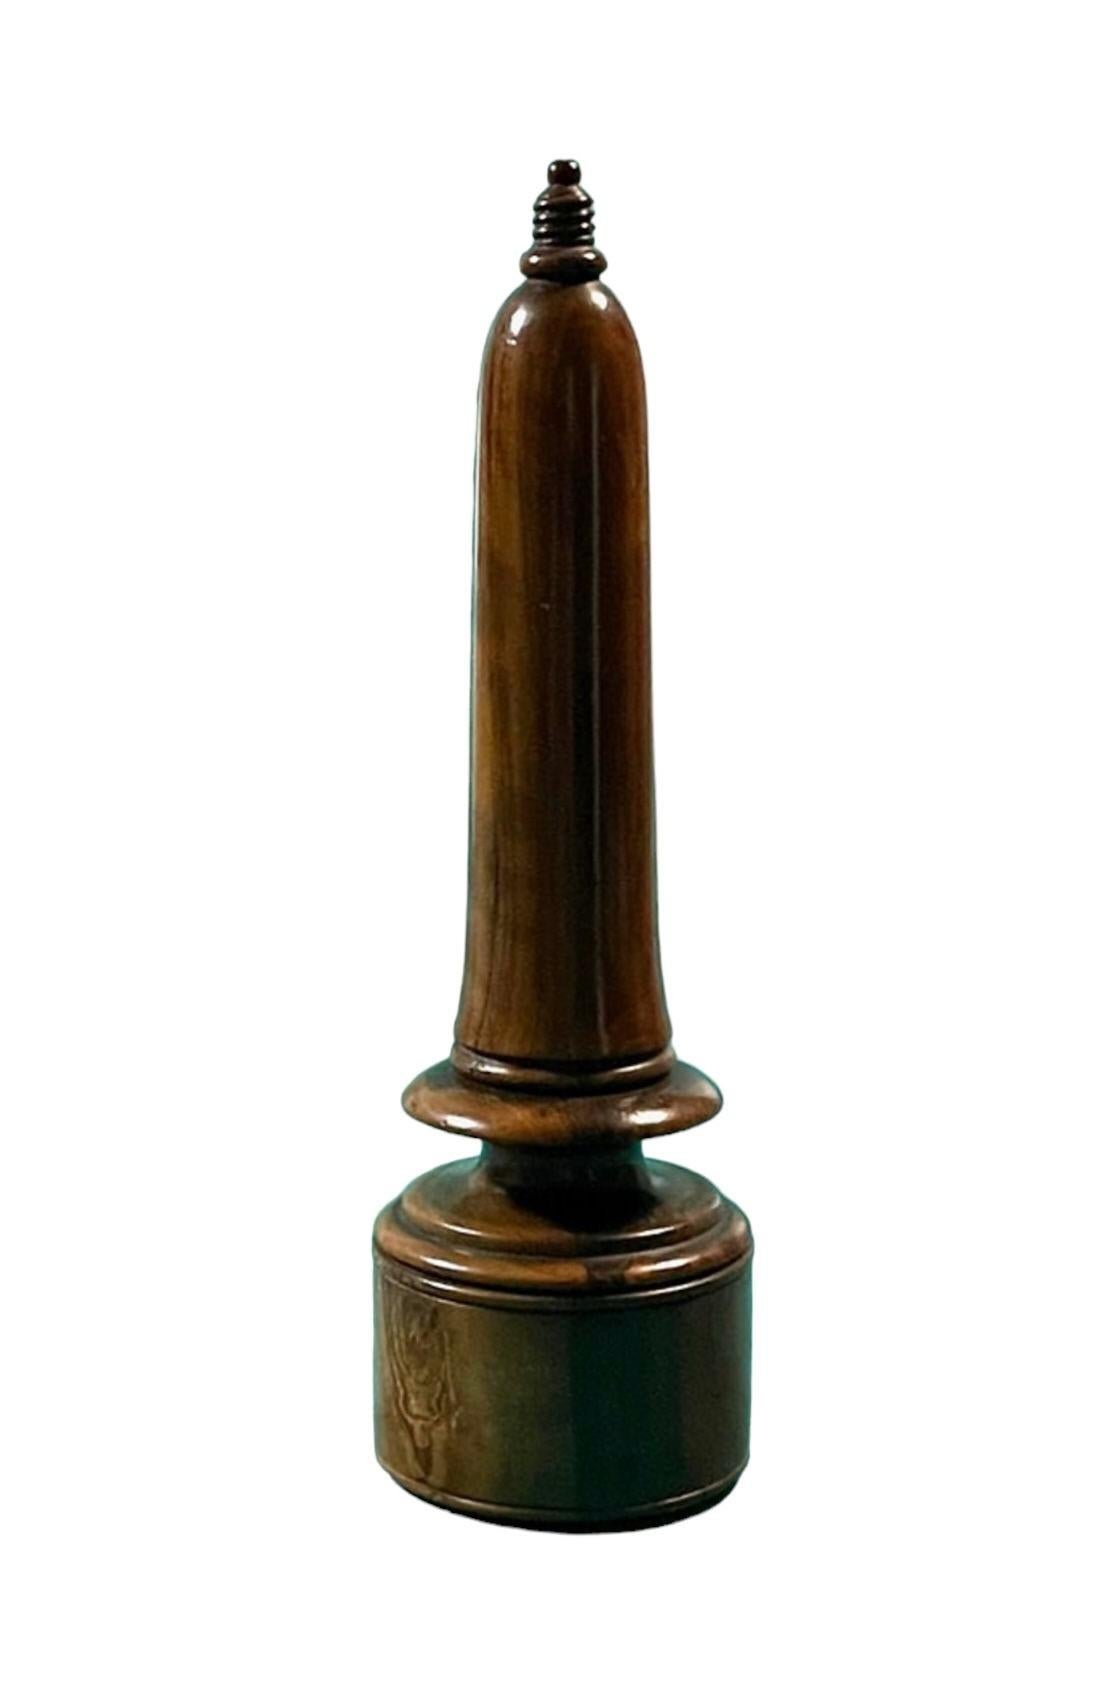 Campaign Antique Treen Traveling Candlestick and Match Holder, 19th Century